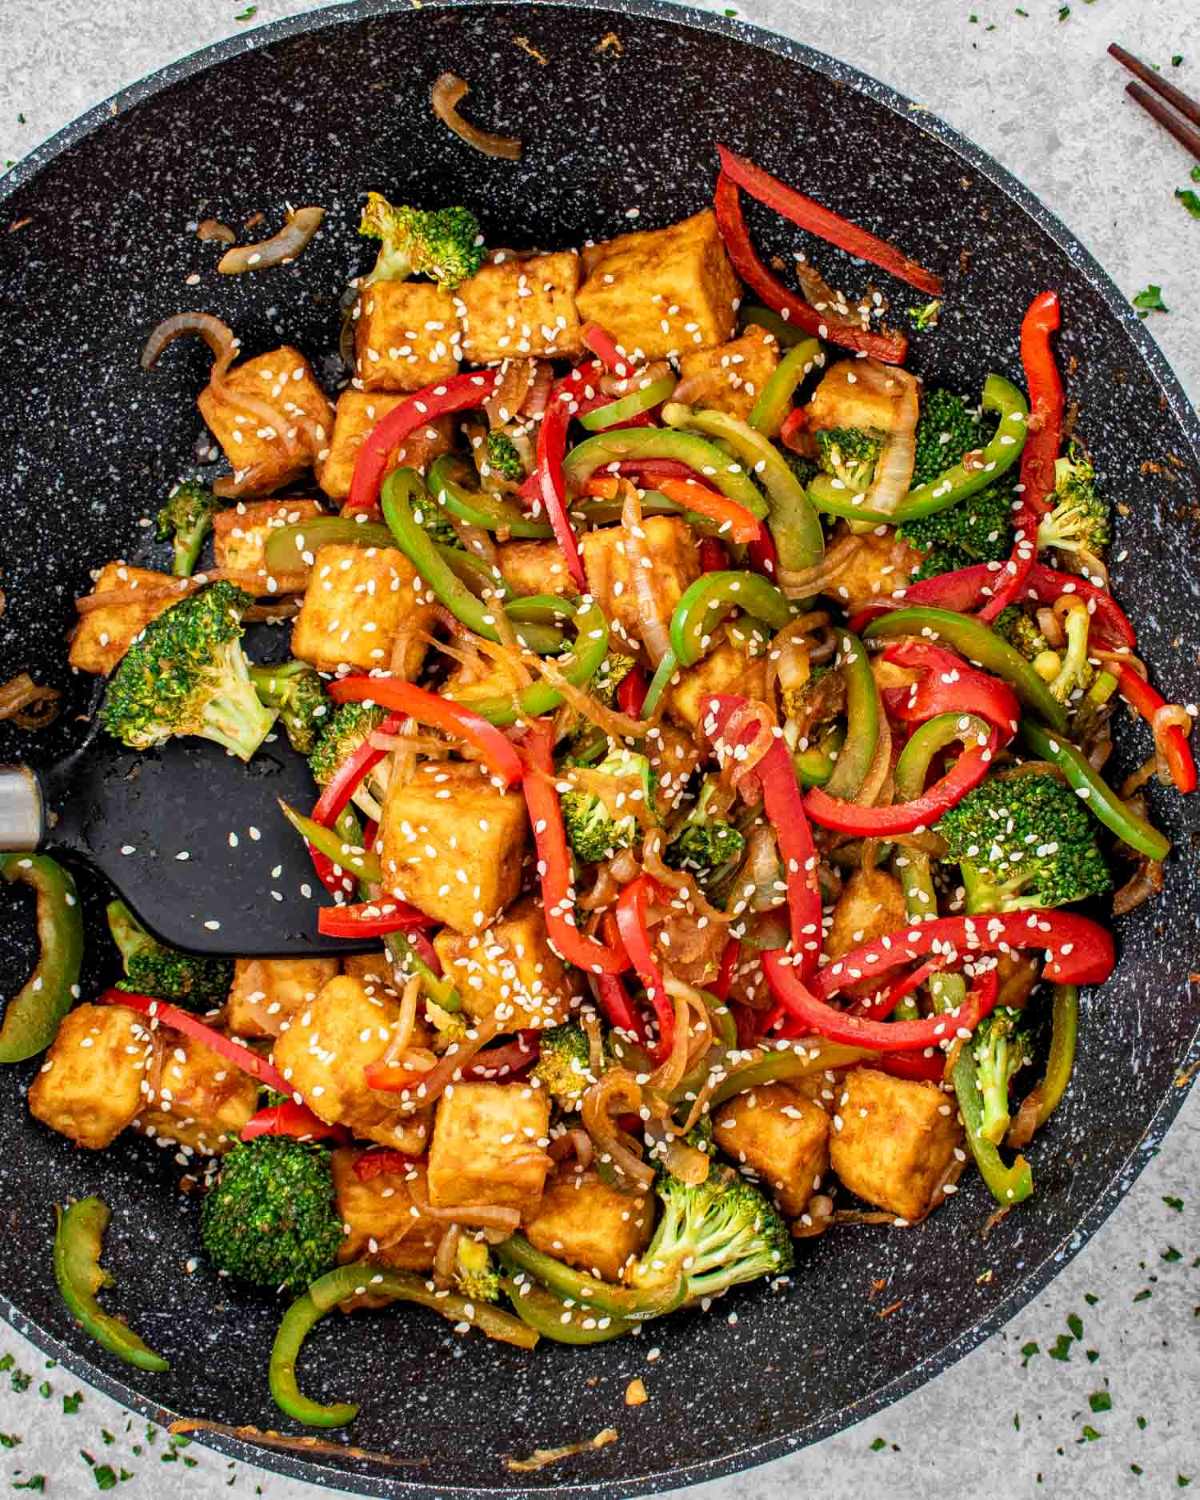 Delicious And Spicy Tofu Scallion Stir-Fry With Peas And Chili Peppers